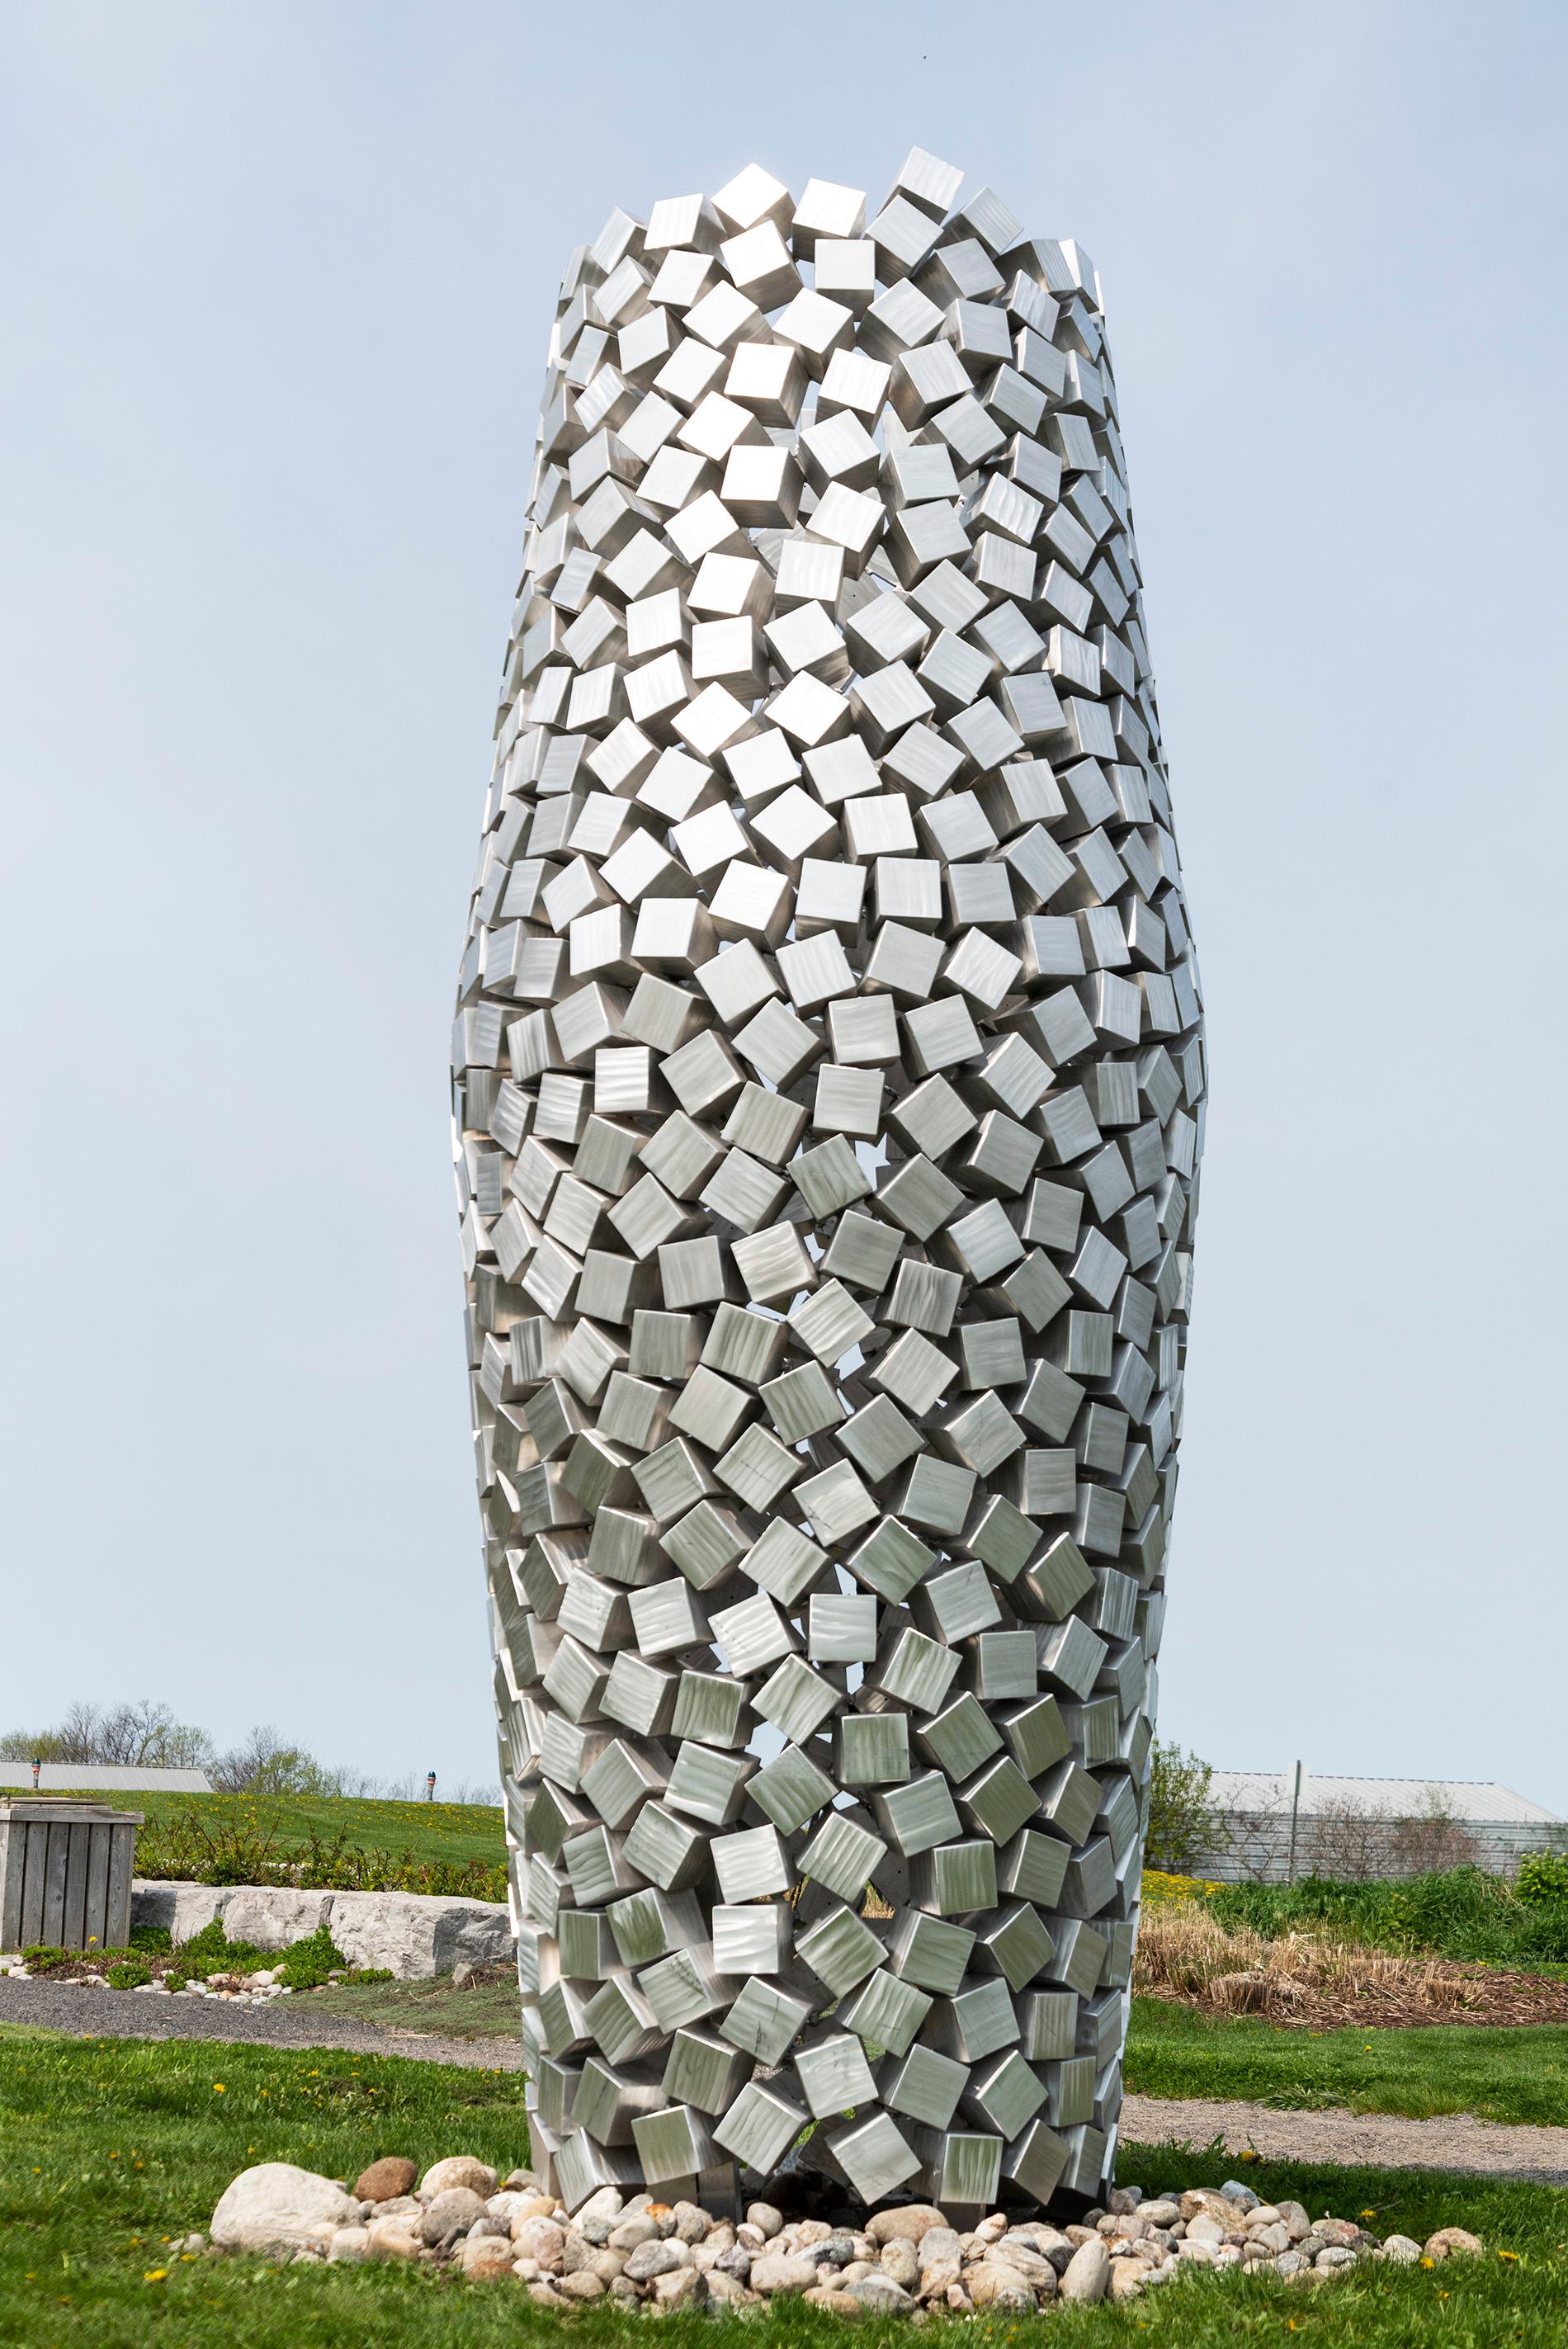 Cones 690 - tall, geometric abstract, polished aluminum outdoor sculpture - Sculpture by Jean-Pierre Morin